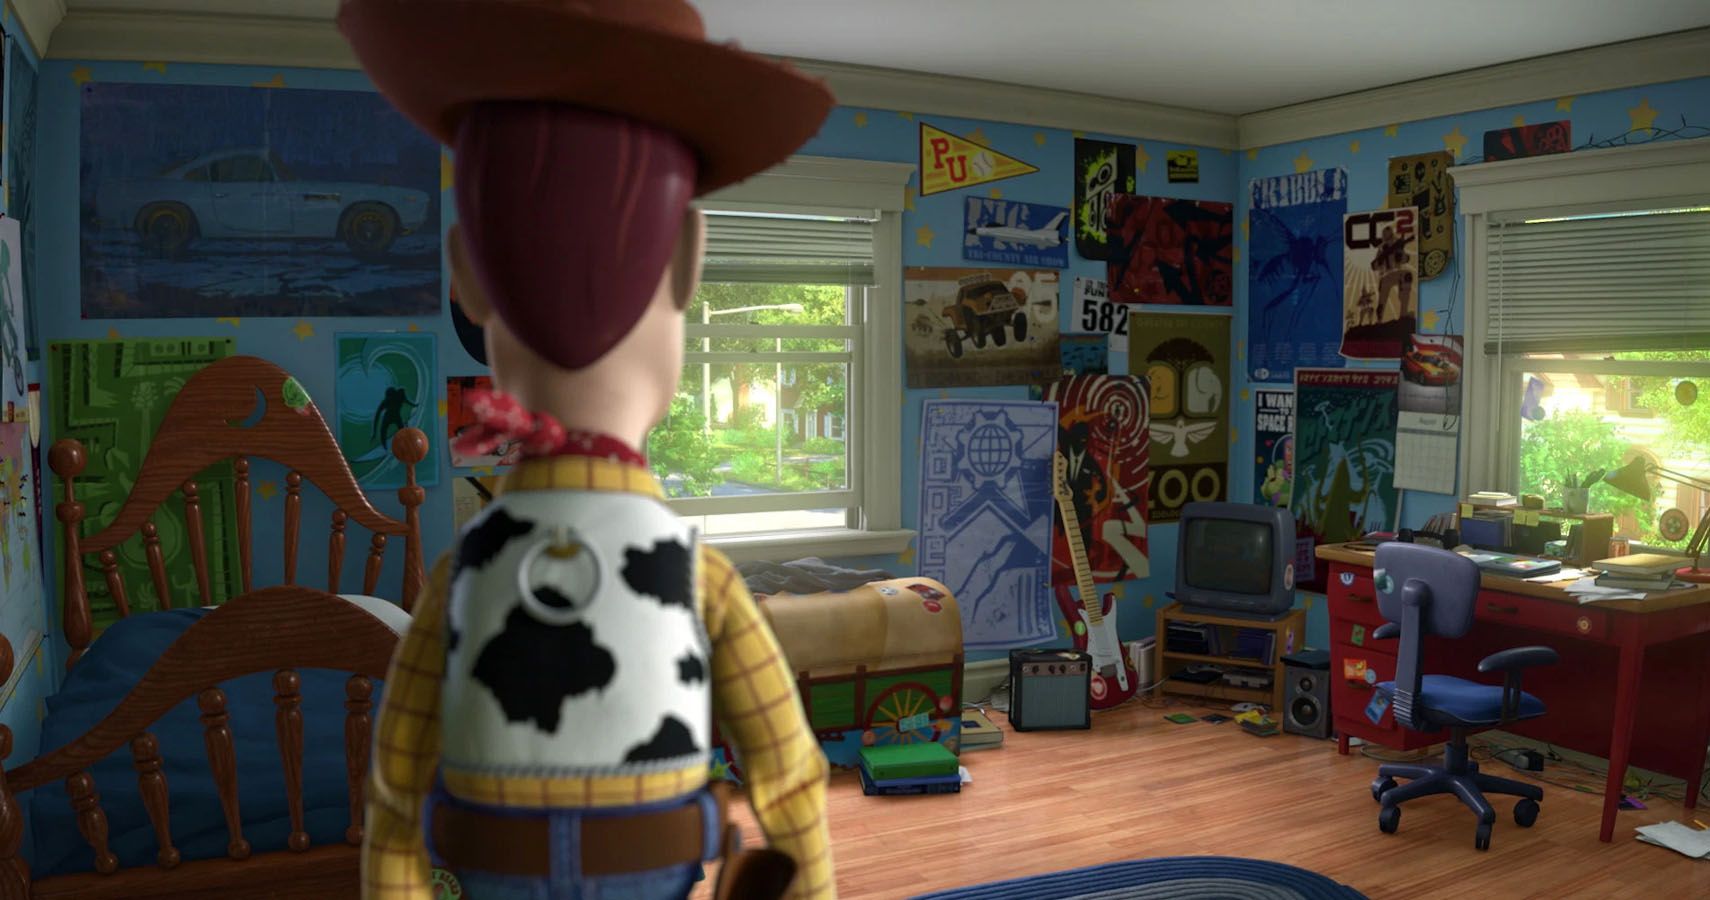 Andys room Wallpaper Poster for Sale by Disney1955Fan  Redbubble